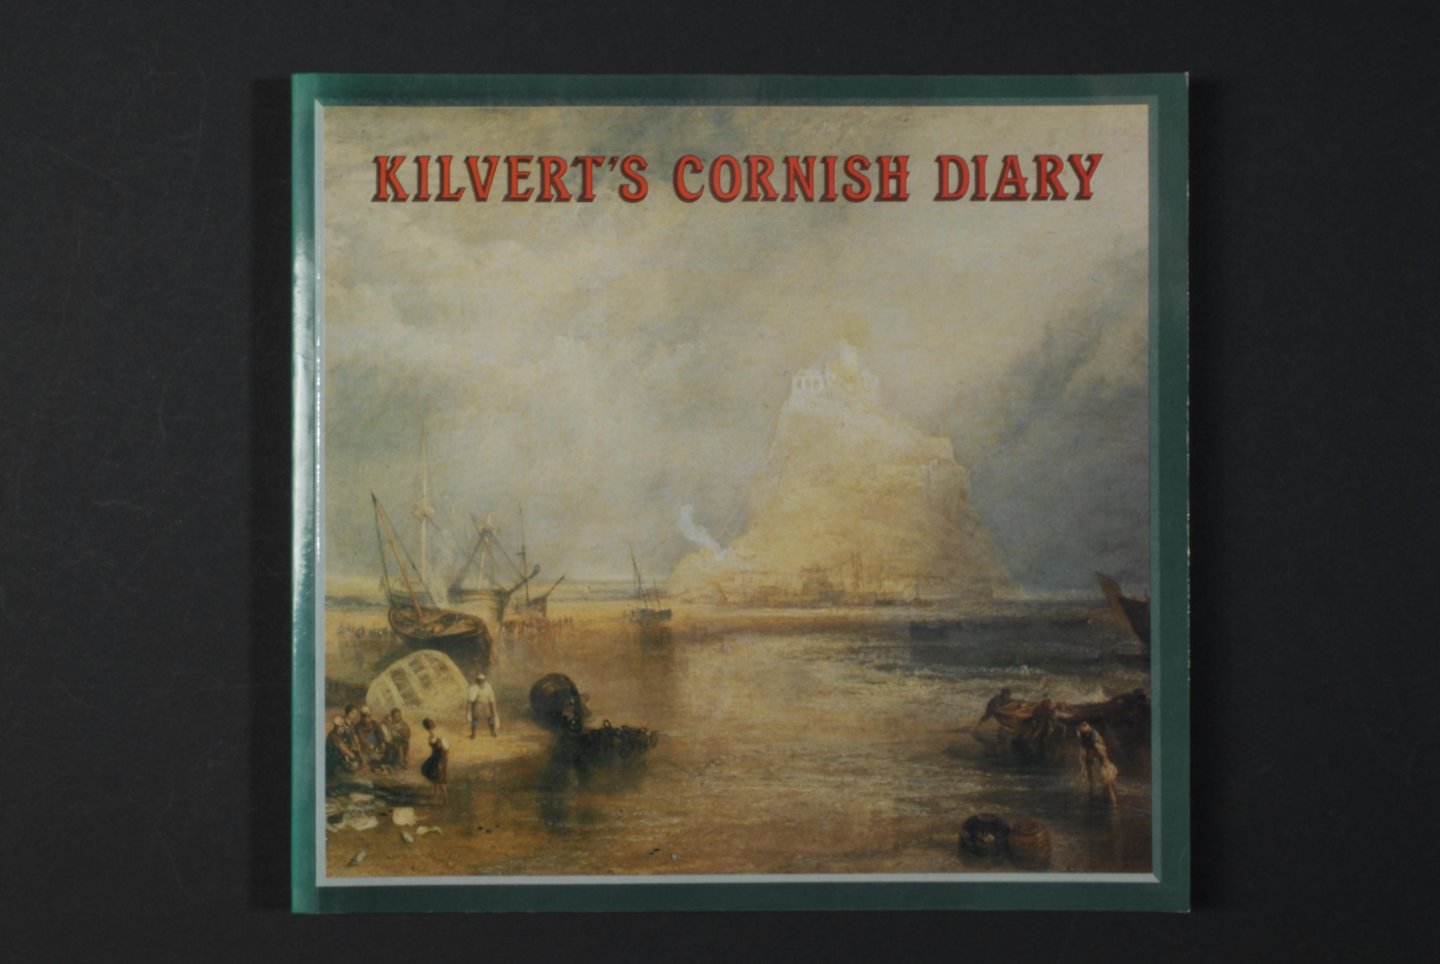 MABER, R. / TREGONING, A. - Kilvert's Cornish Diary. Journal no.4, 1870.